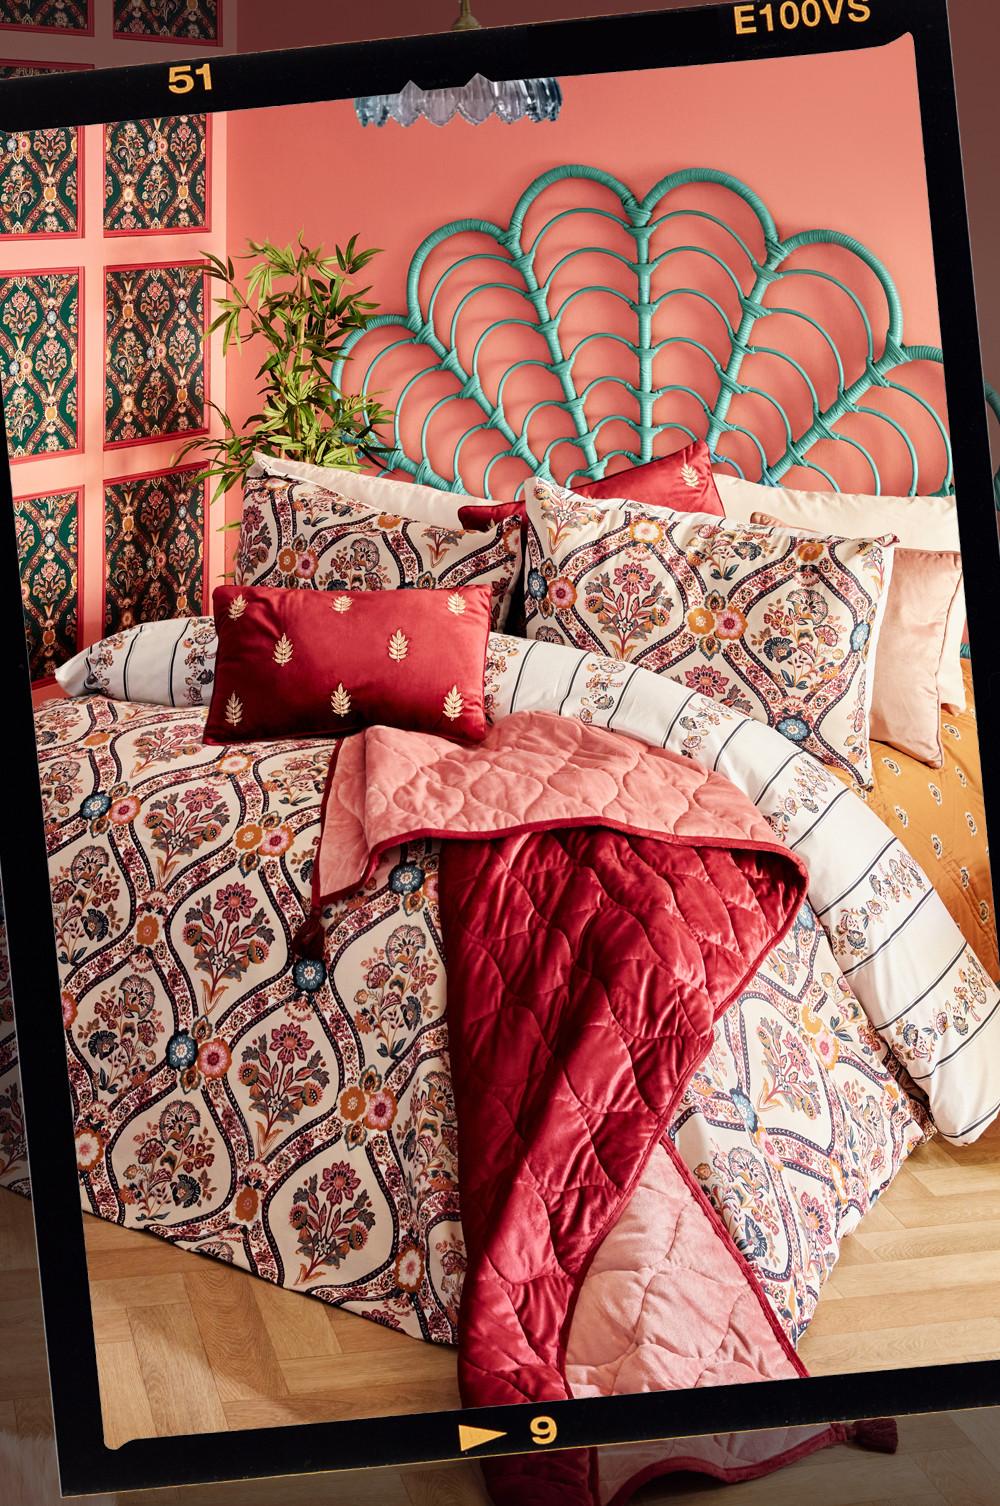 Patterned duvet cover and pillows